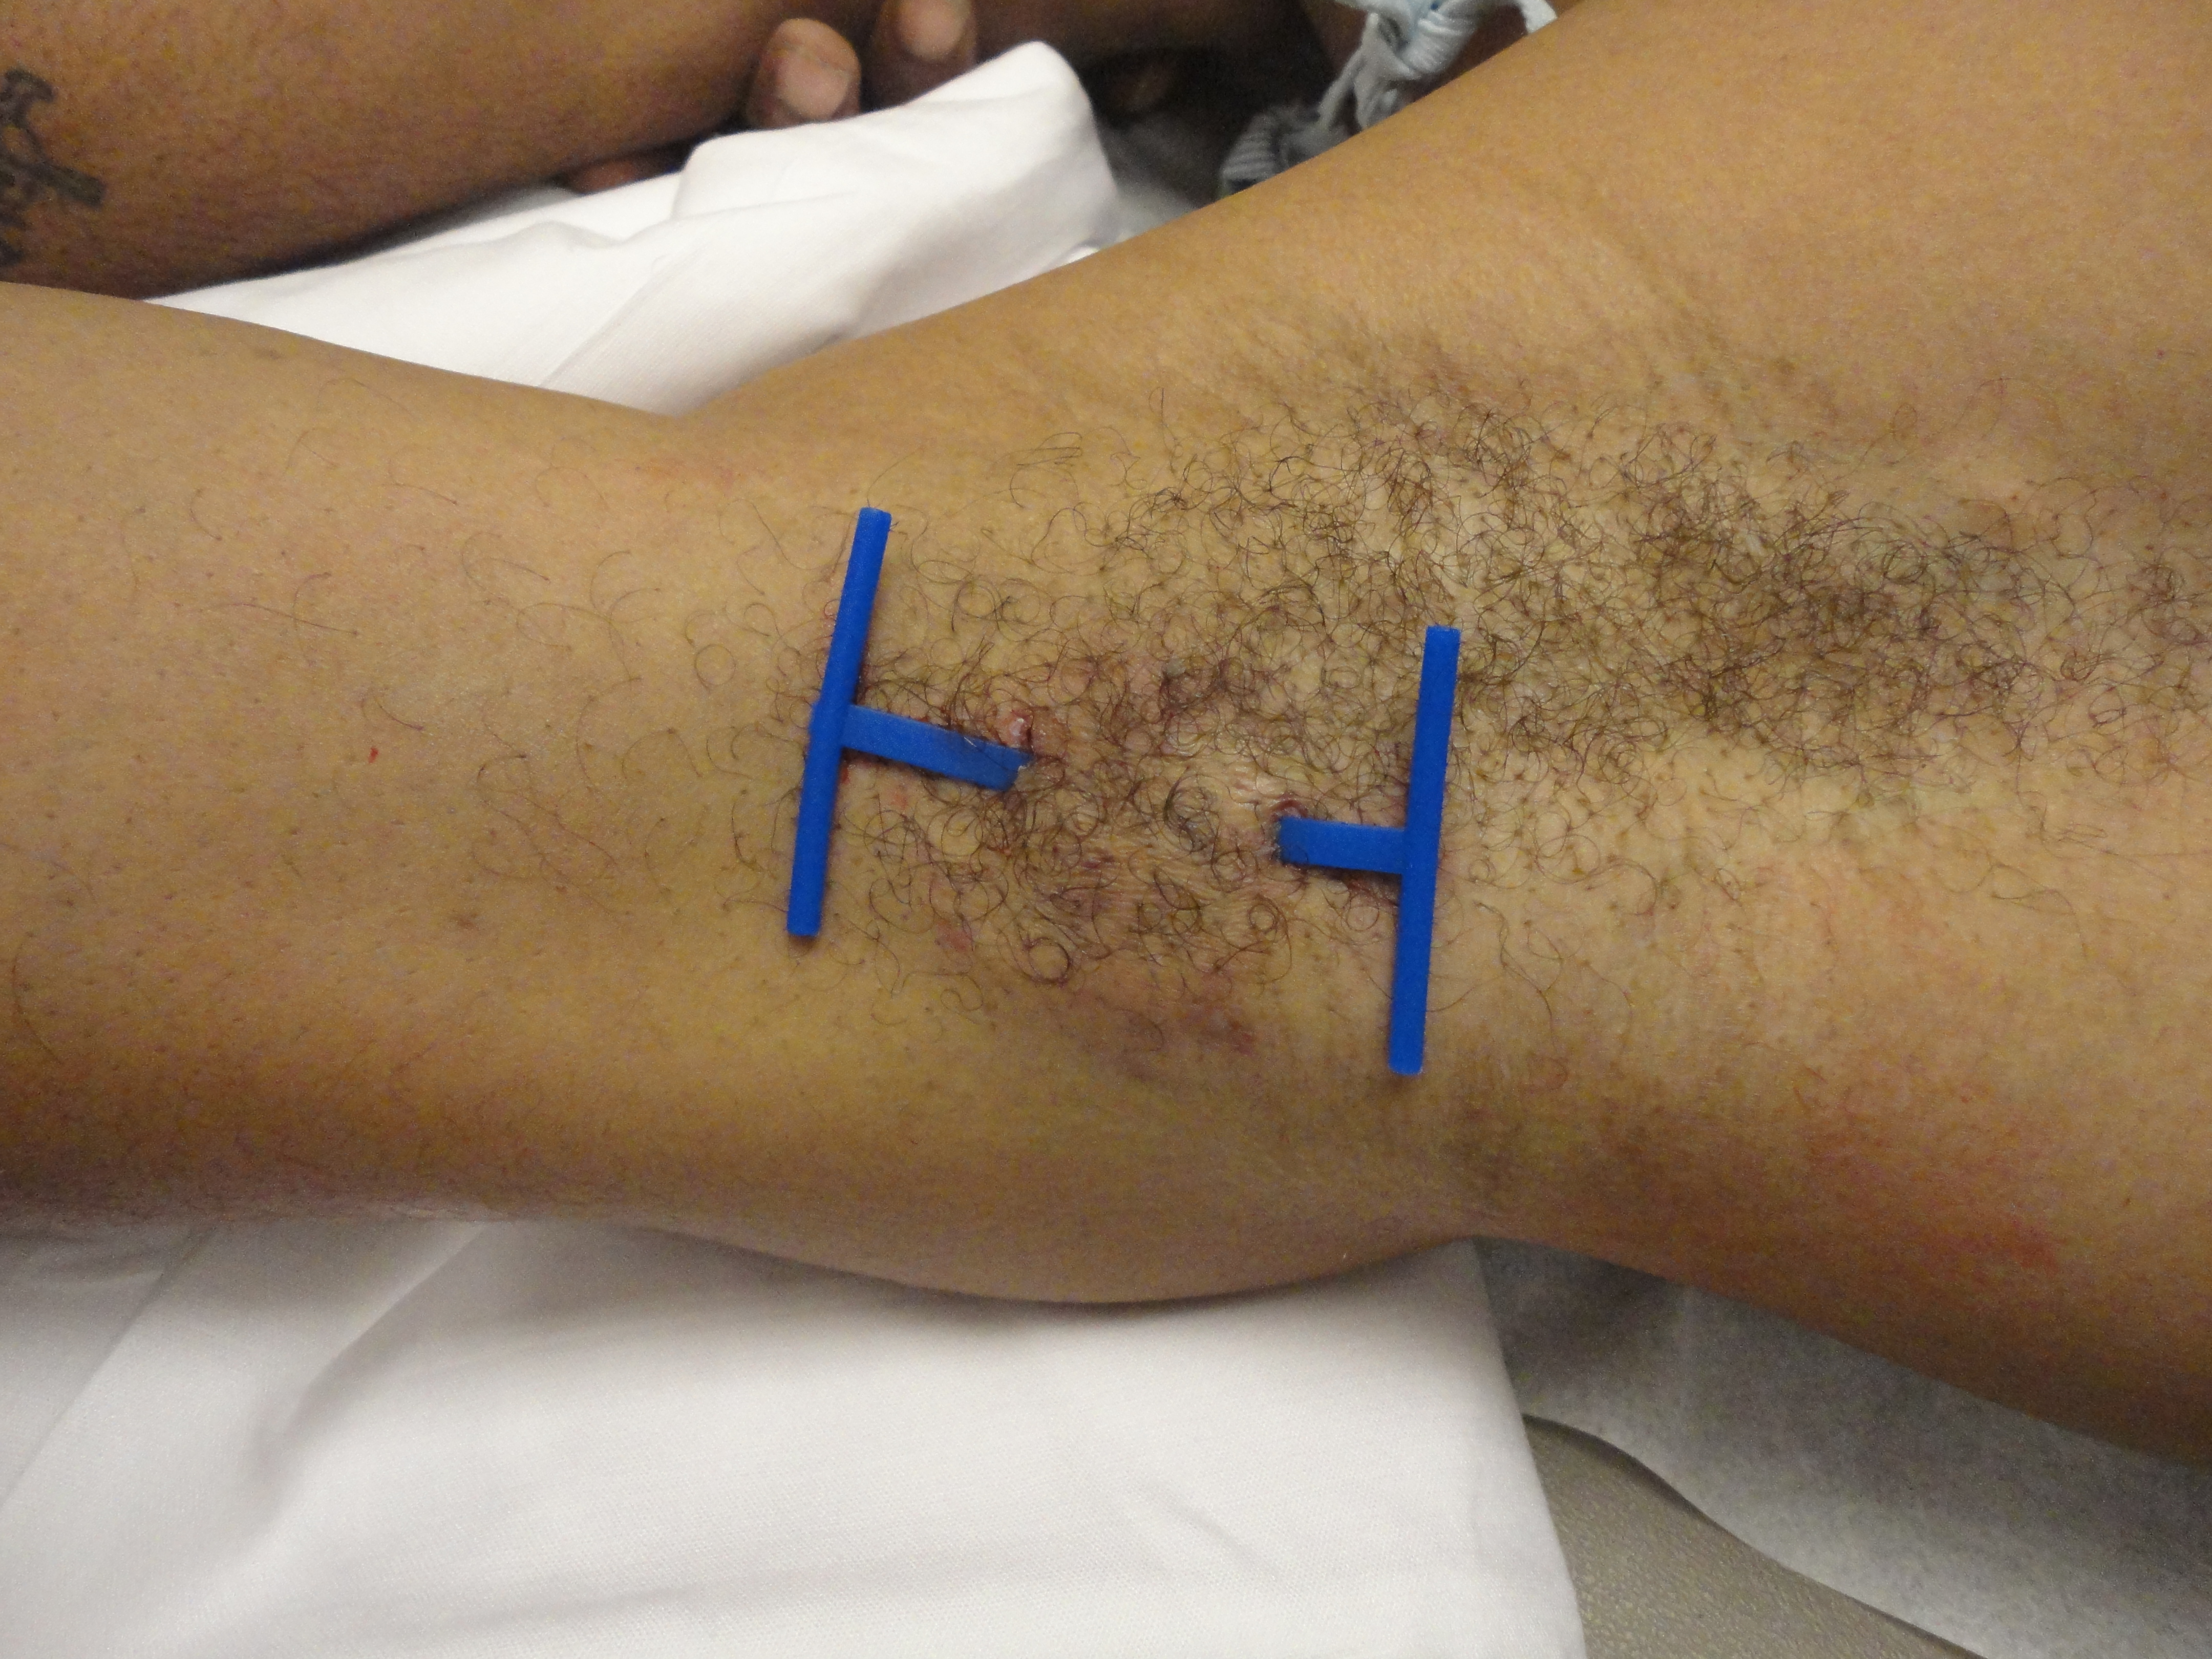 The Derma-Stent was applied to an abscess located in the patient's armpit.